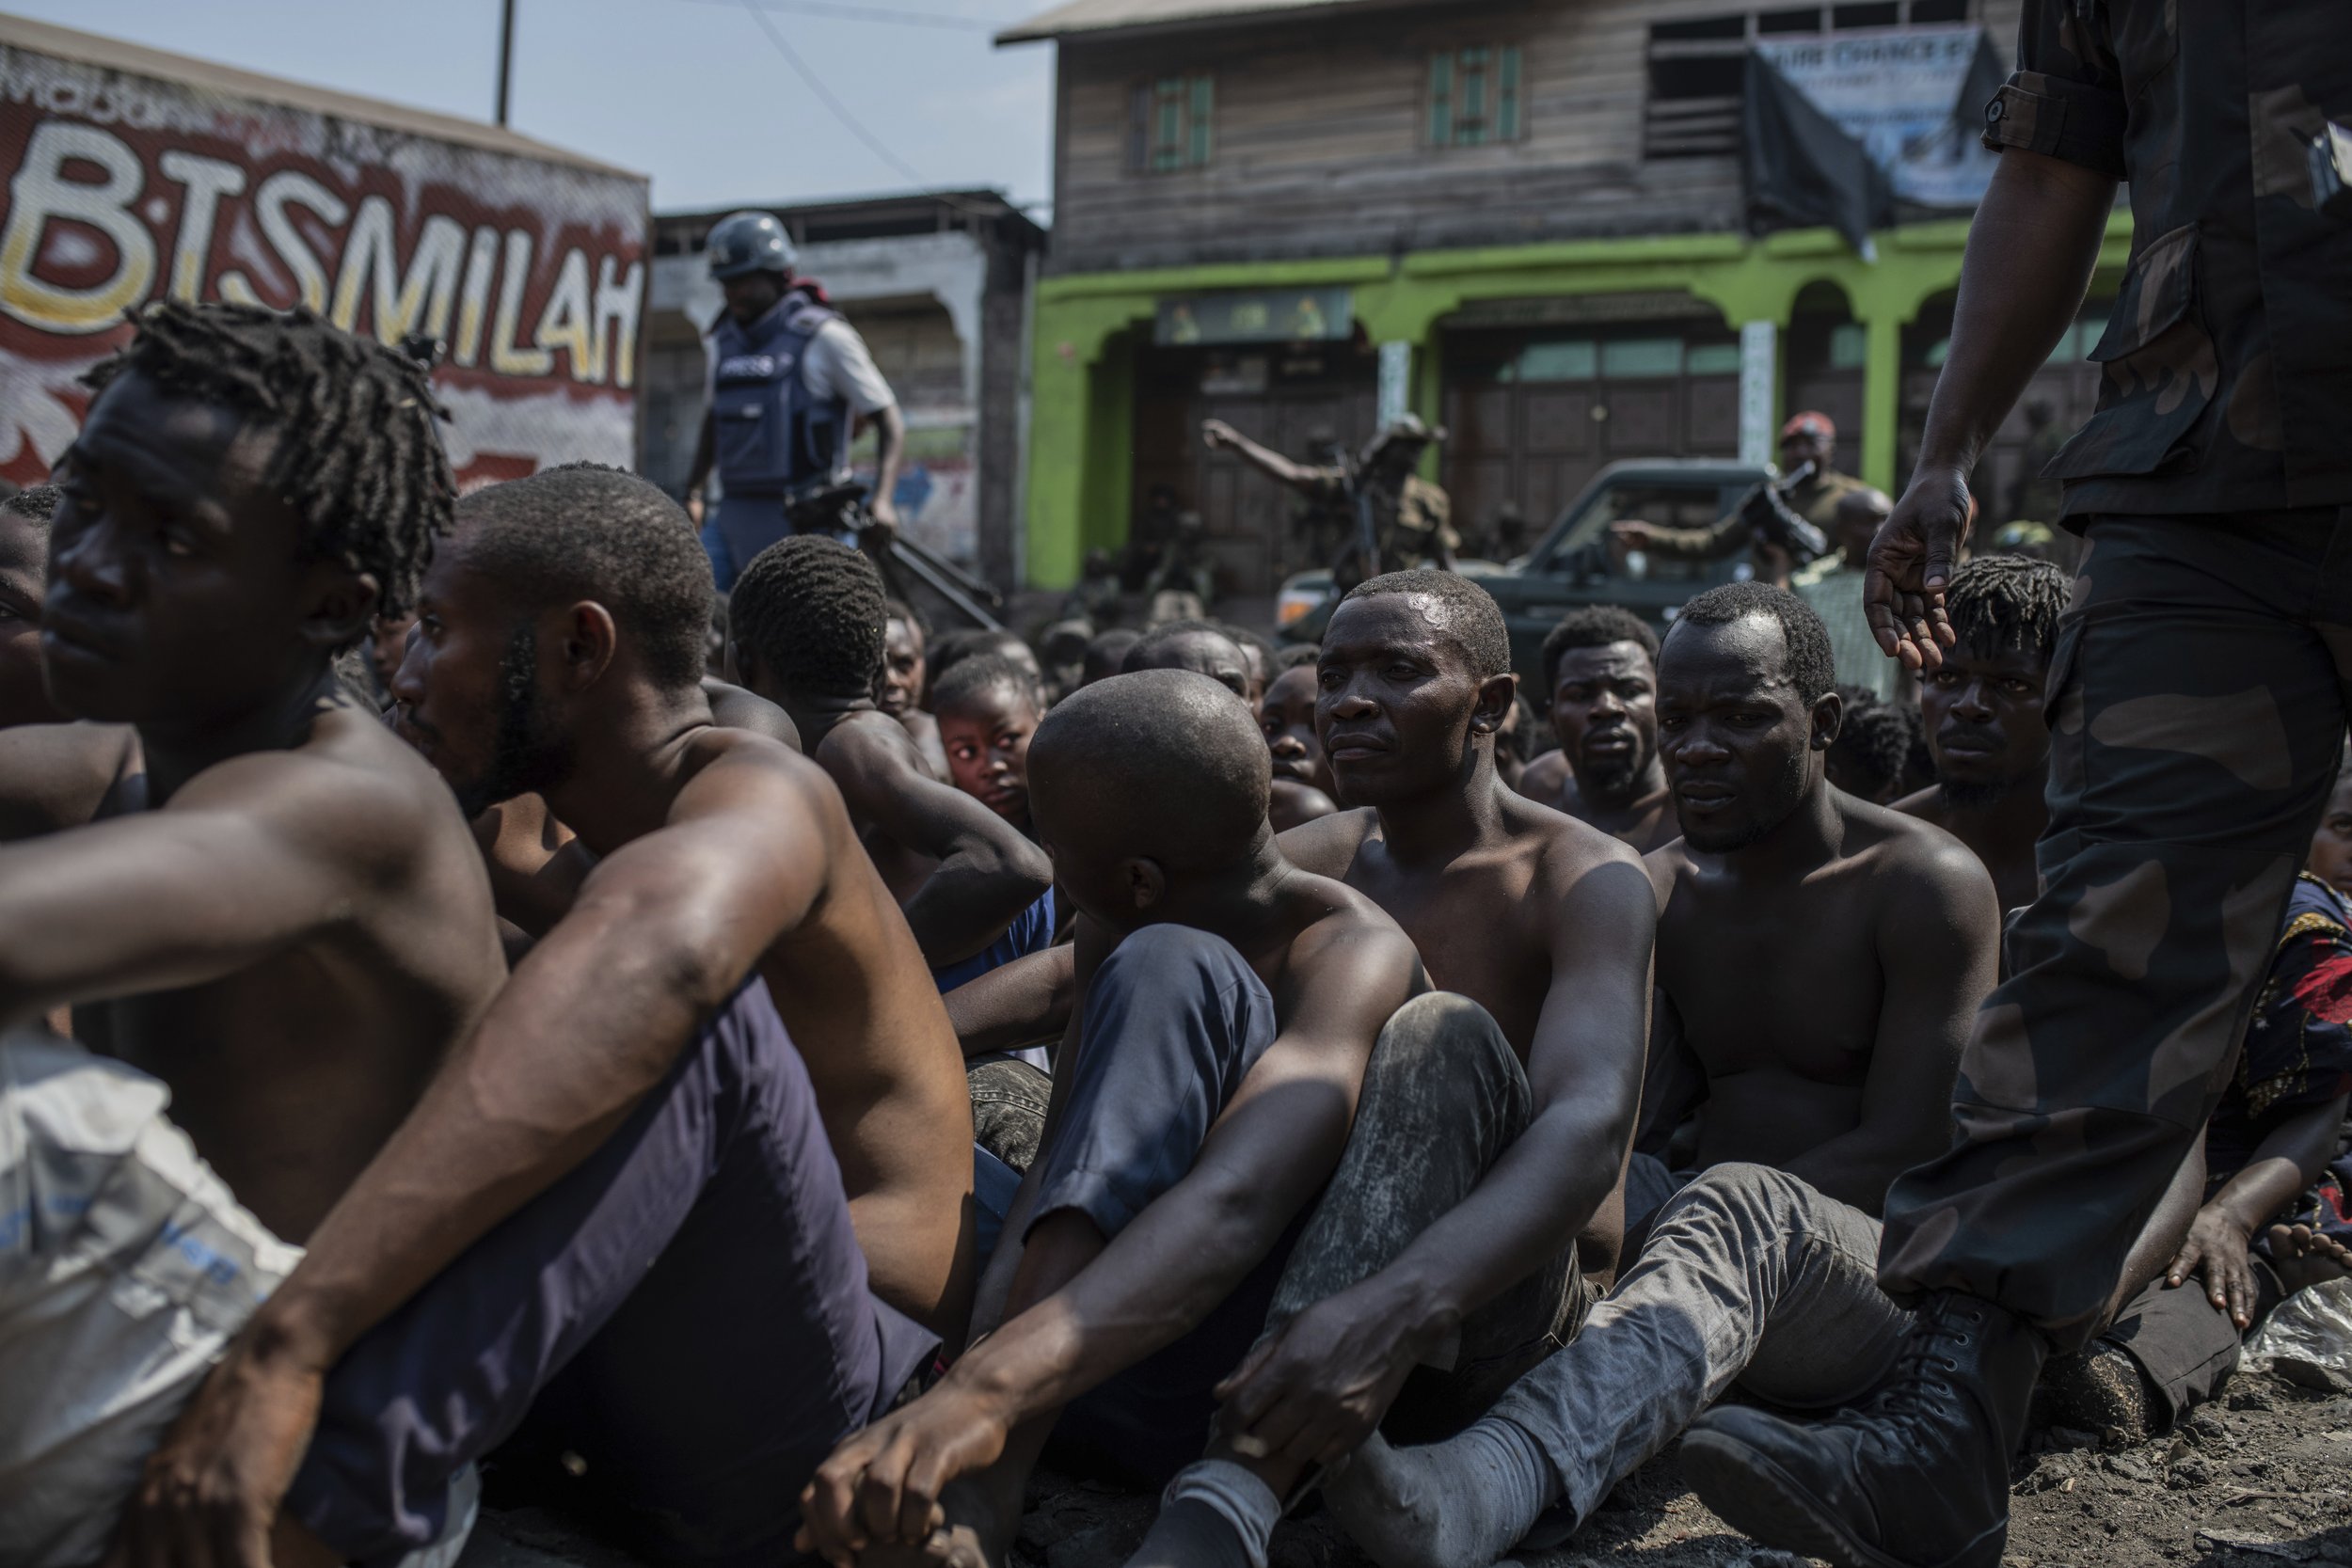  Arrested members of the Wazalendo sect are seated and lined up in Goma, Democratic Republic of the Congo, on Aug. 30, 2023. More than 40 people died and dozens were injured in clashes in Goma between protesters from the Wazalendo religious sect and 